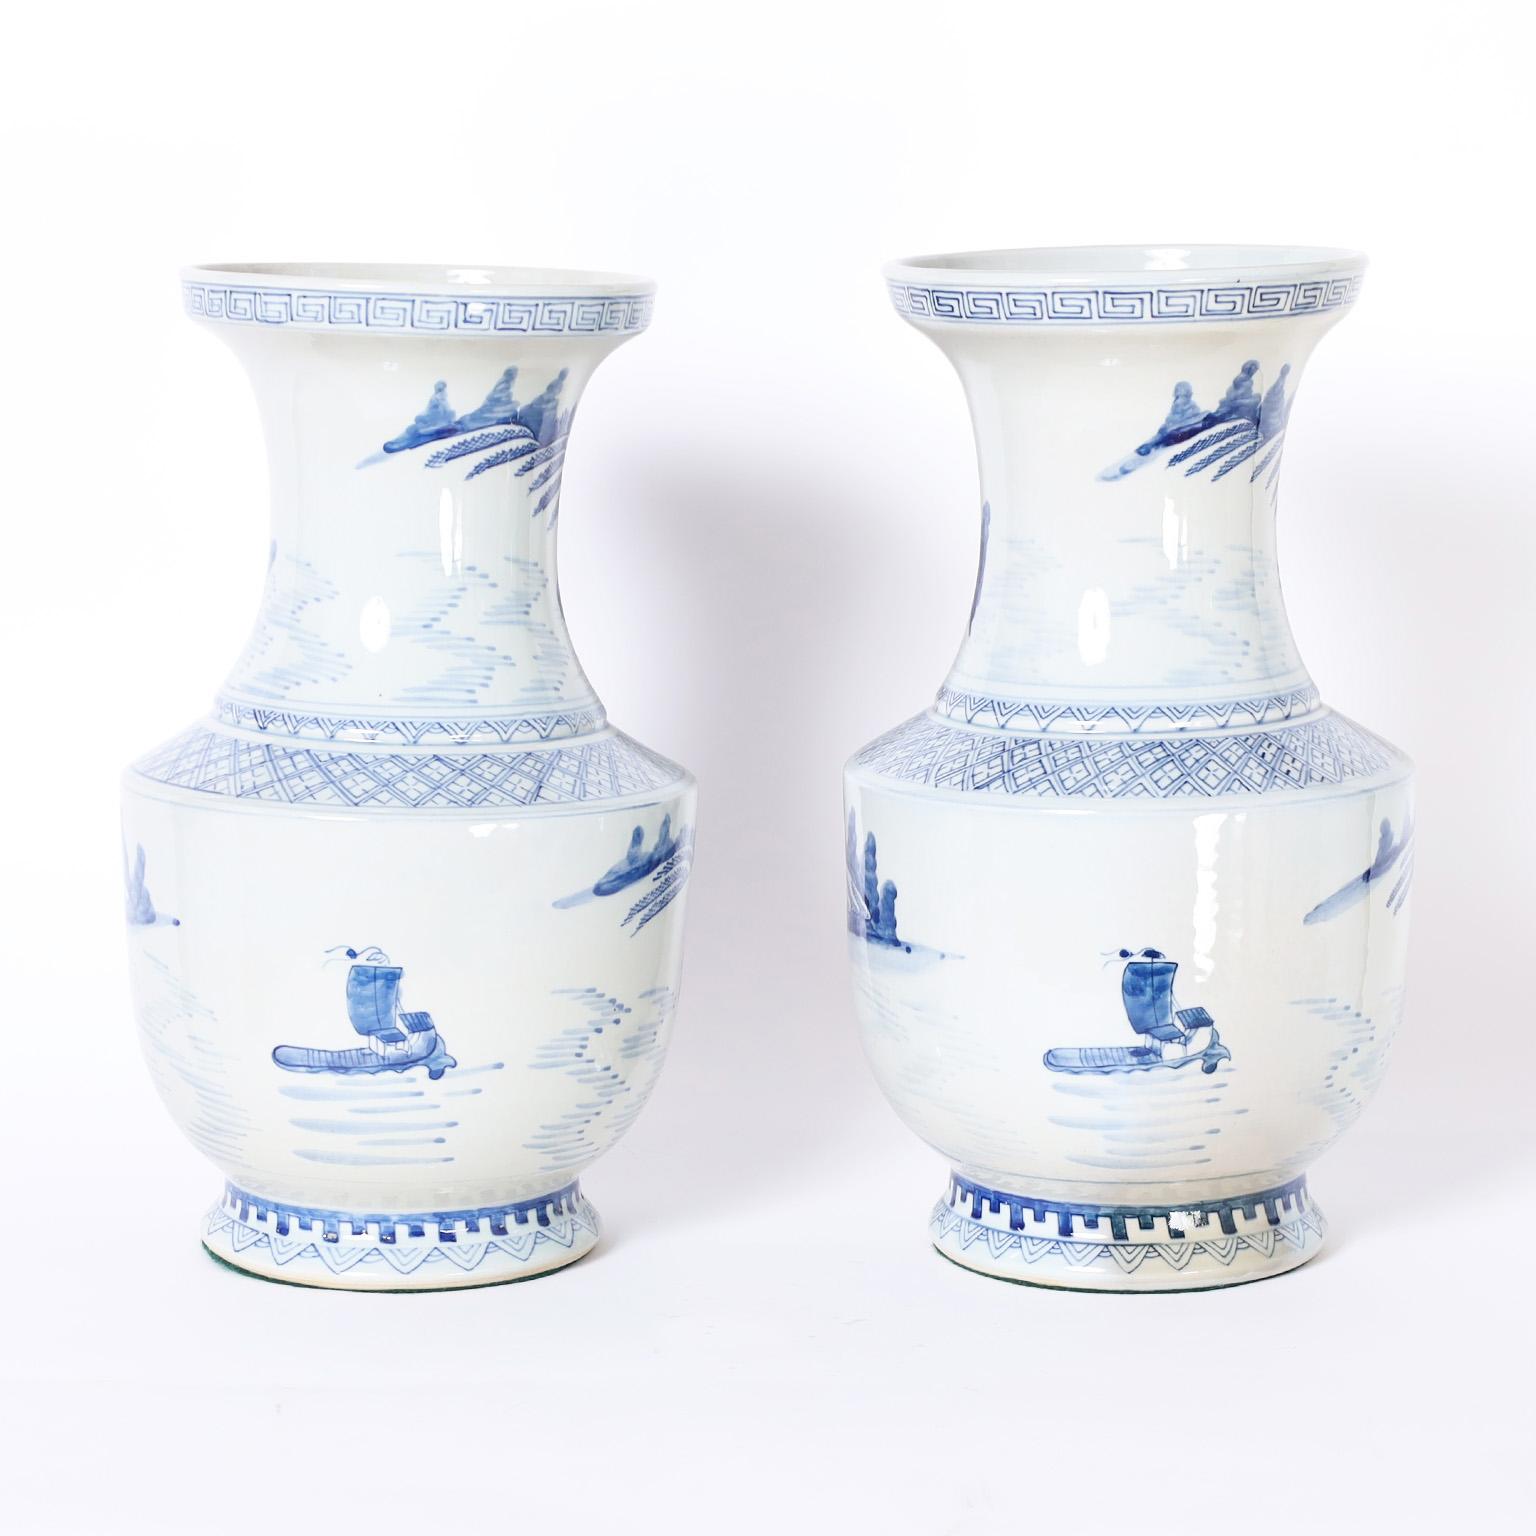 Pair of Chinese blue and white porcelain vases with classic form hand decorated with geometric borders and landscapes with trees and architecture.